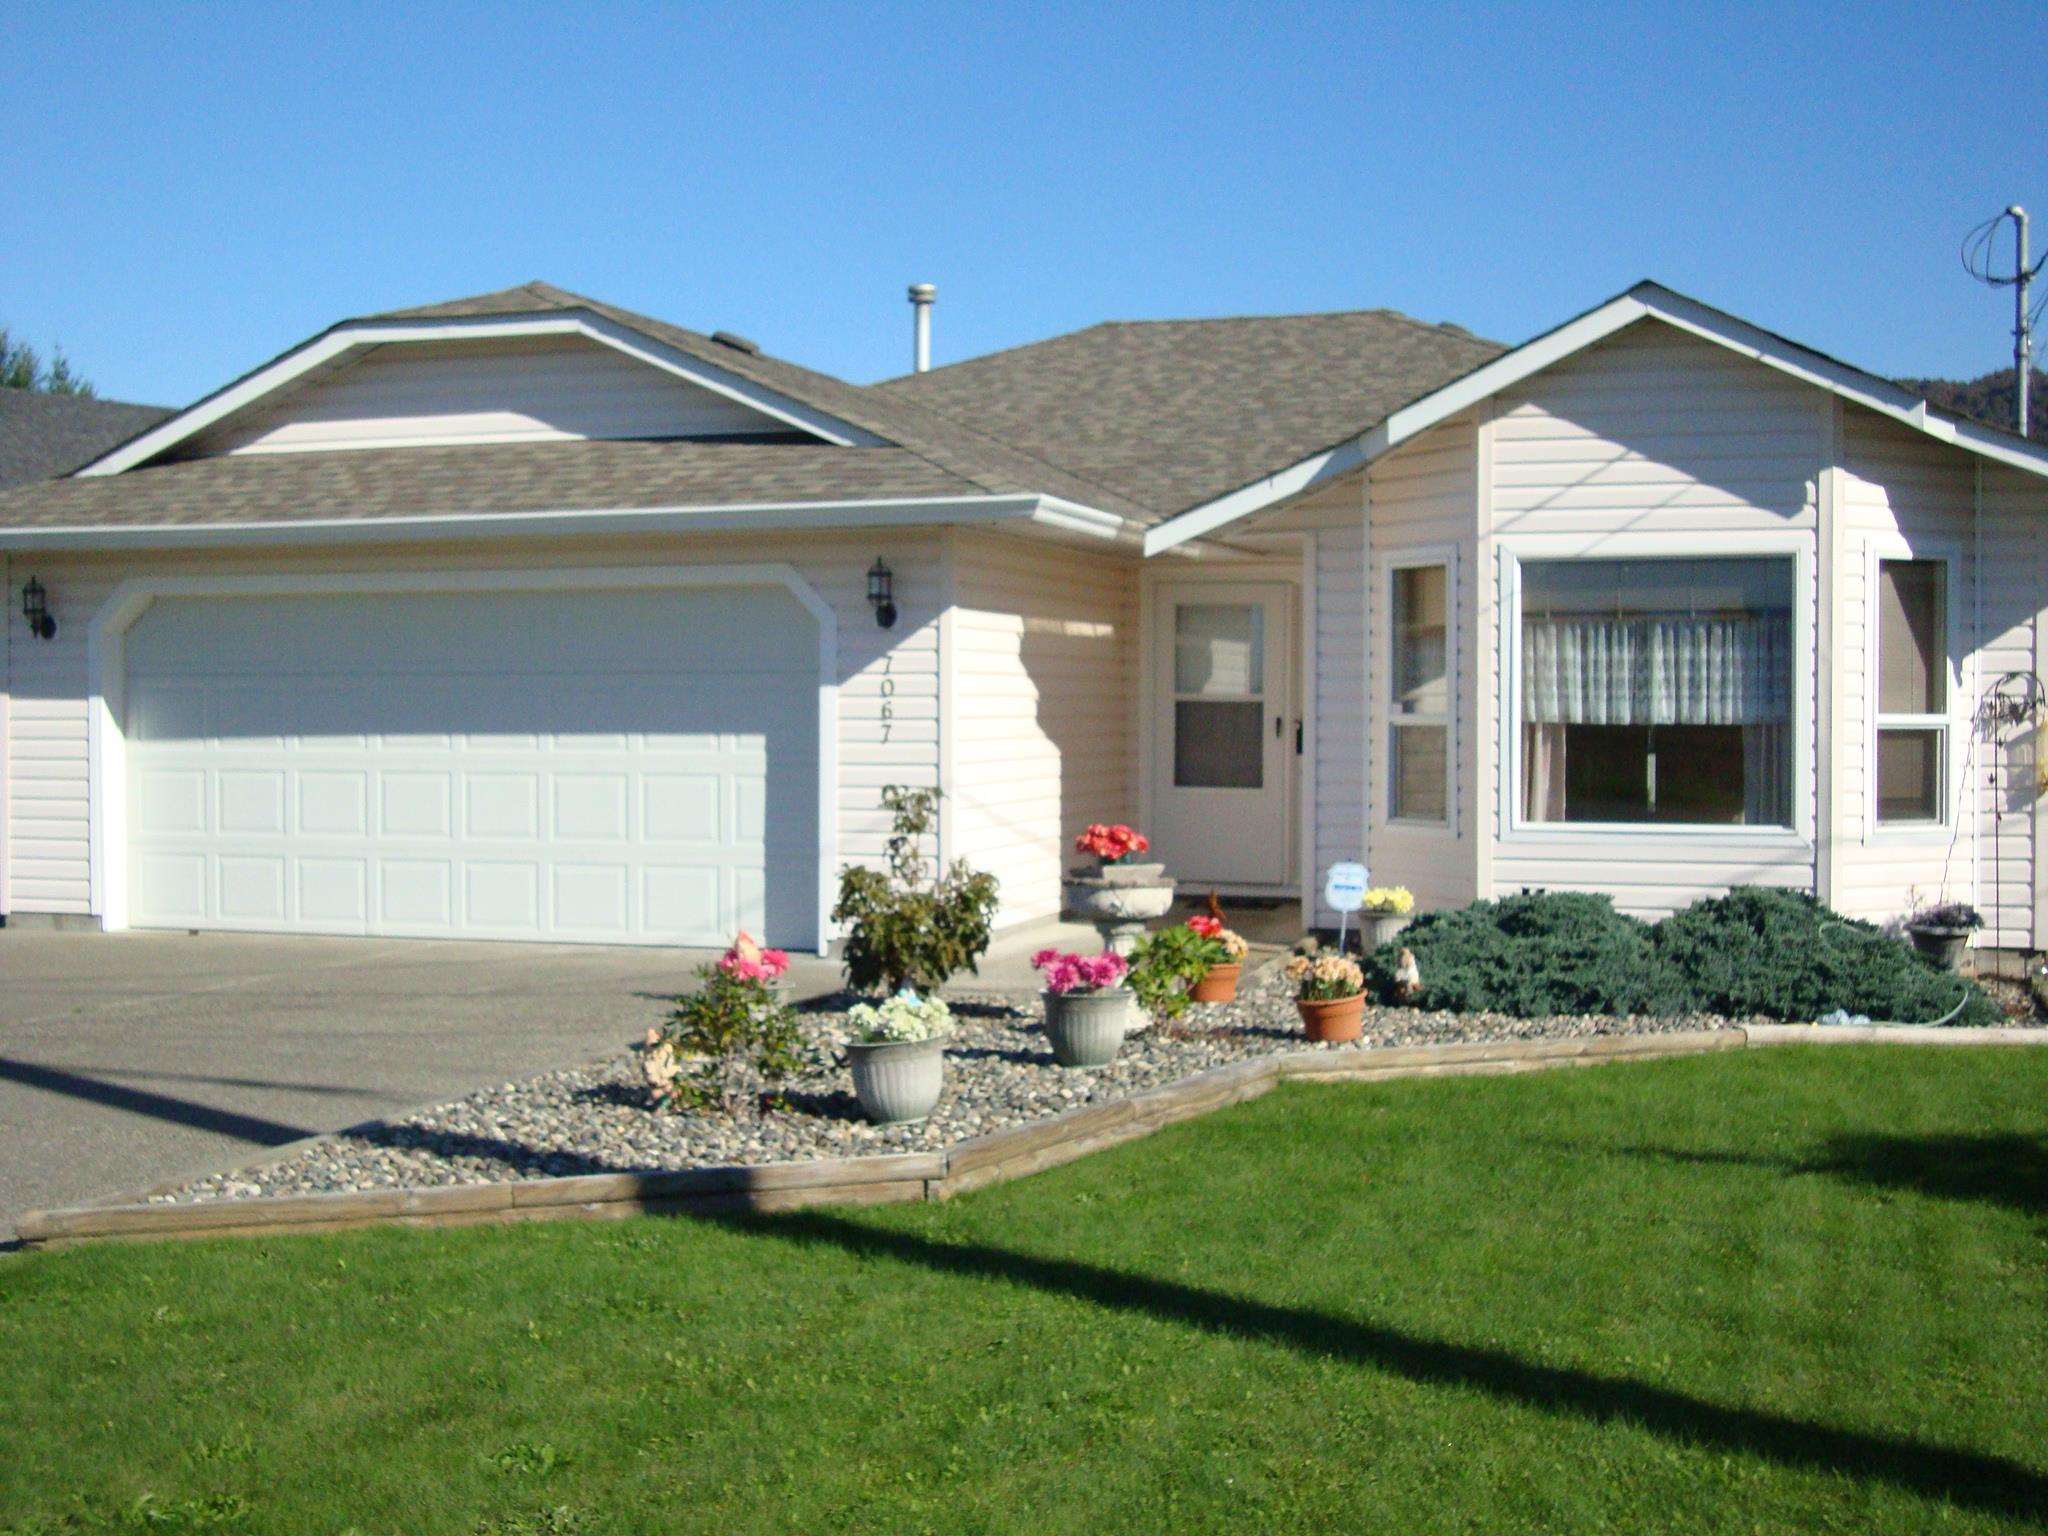 Agassiz House/Single Family for sale:  2 bedroom 1,227 sq.ft. (Listed 8800-04-27)